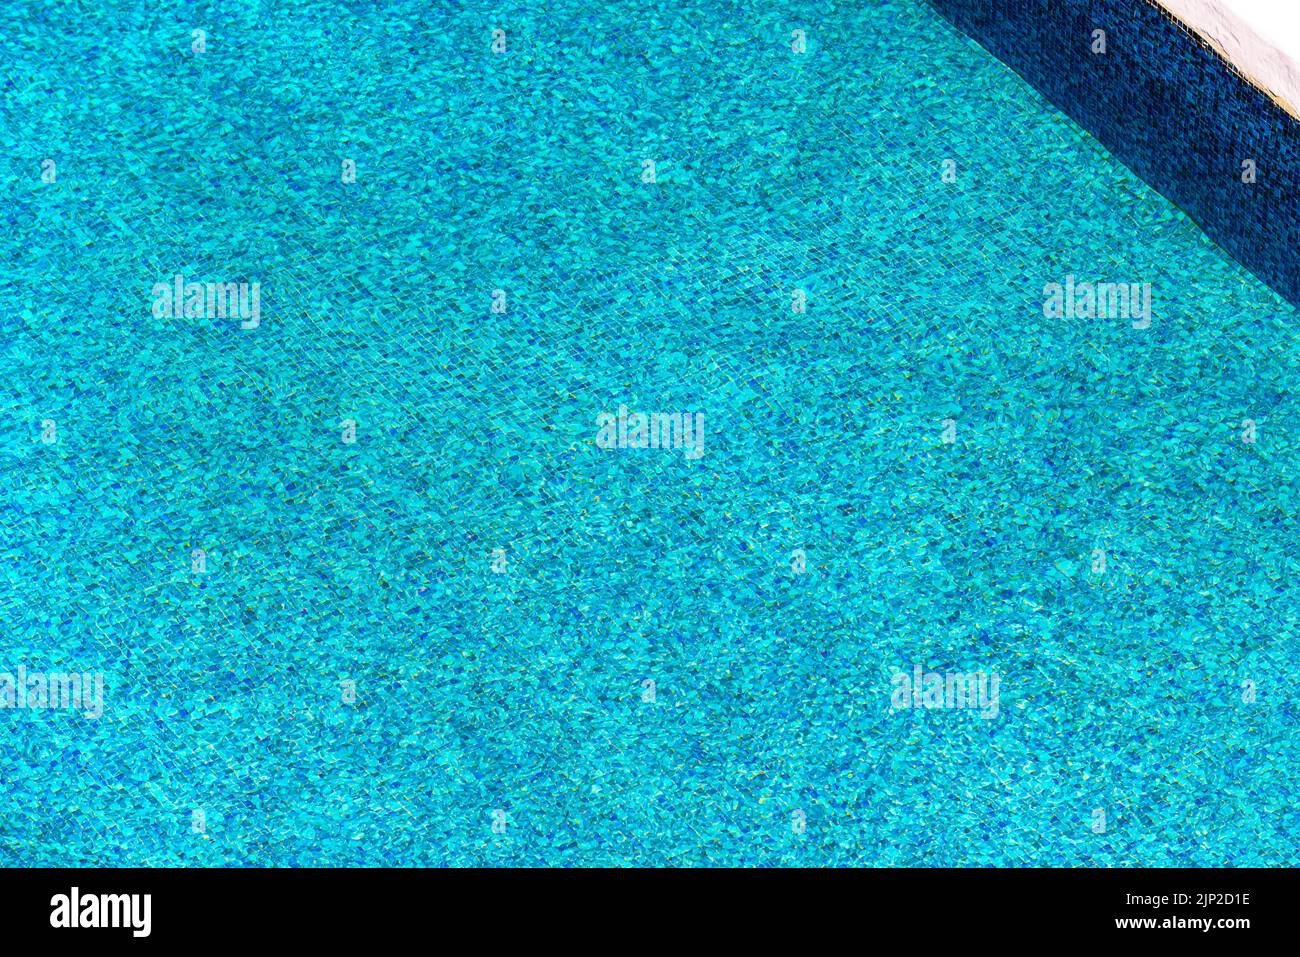 Outdoor swimming pool water as abstract summer season background, high angle view Stock Photo